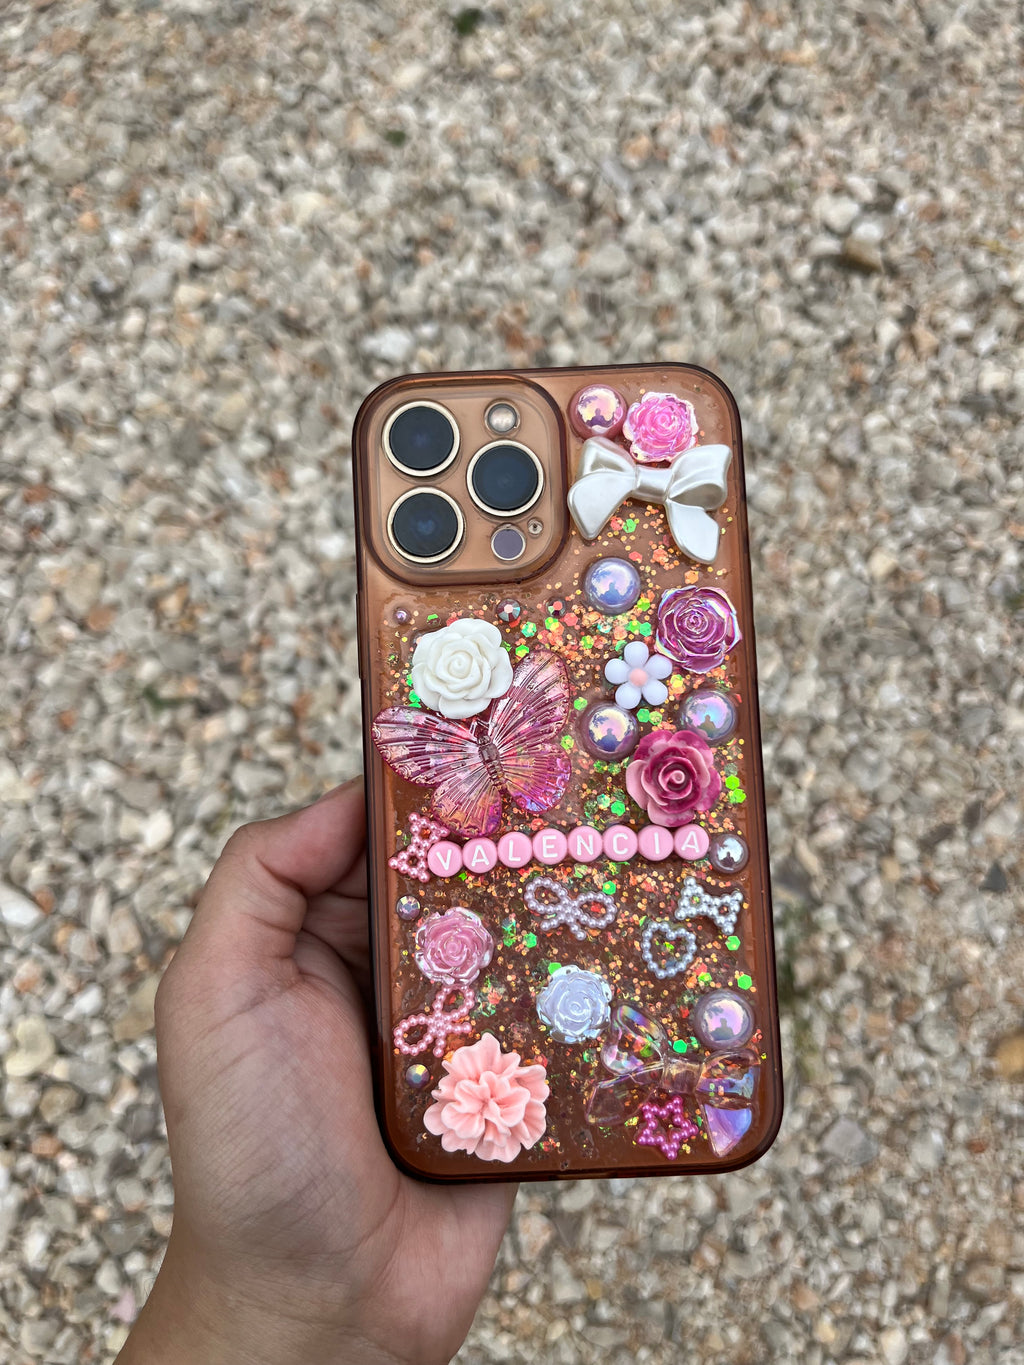 Customized Bling/Junk Phone Case